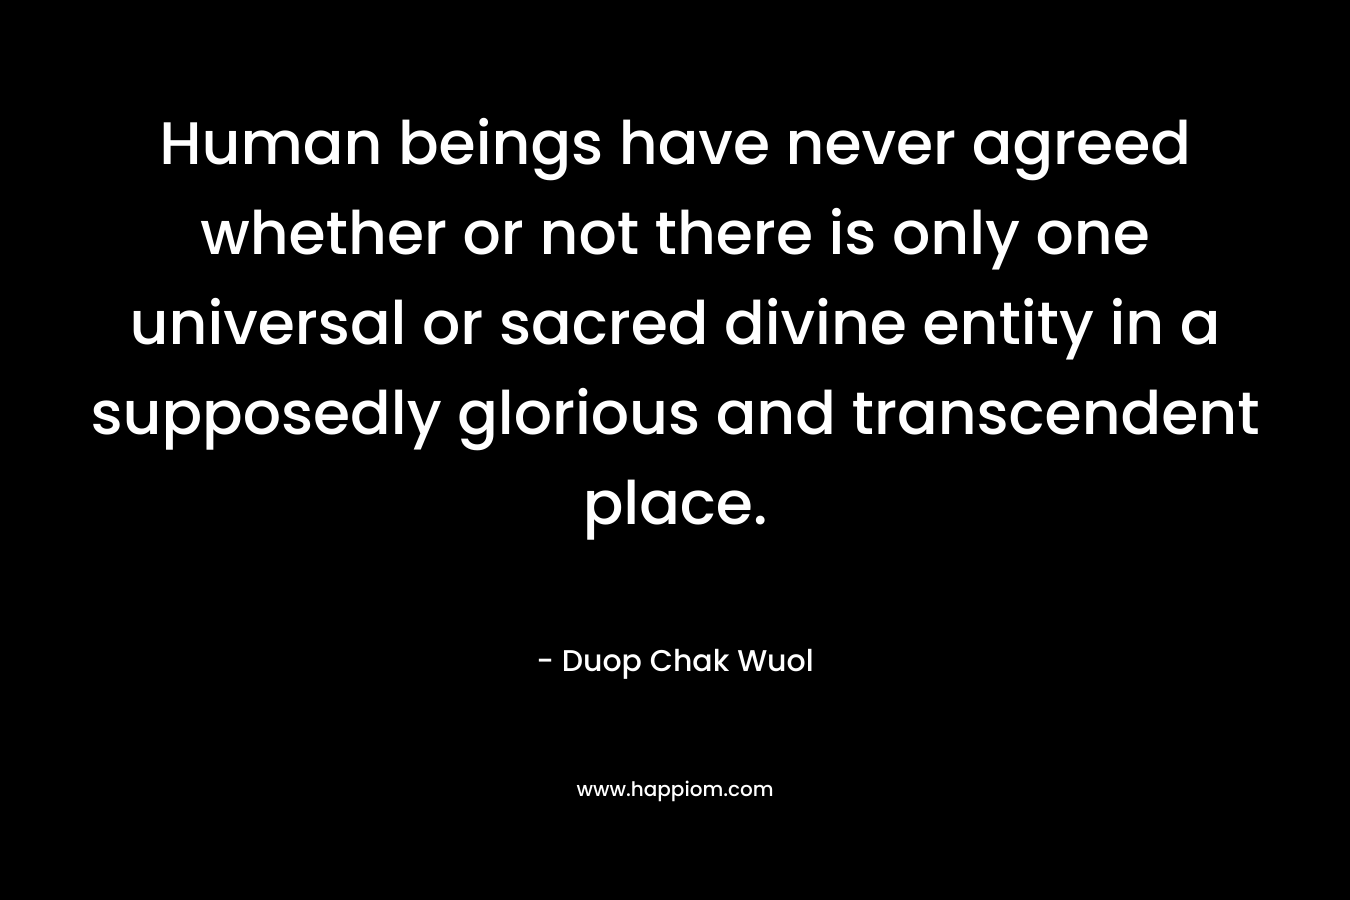 Human beings have never agreed whether or not there is only one universal or sacred divine entity in a supposedly glorious and transcendent place.